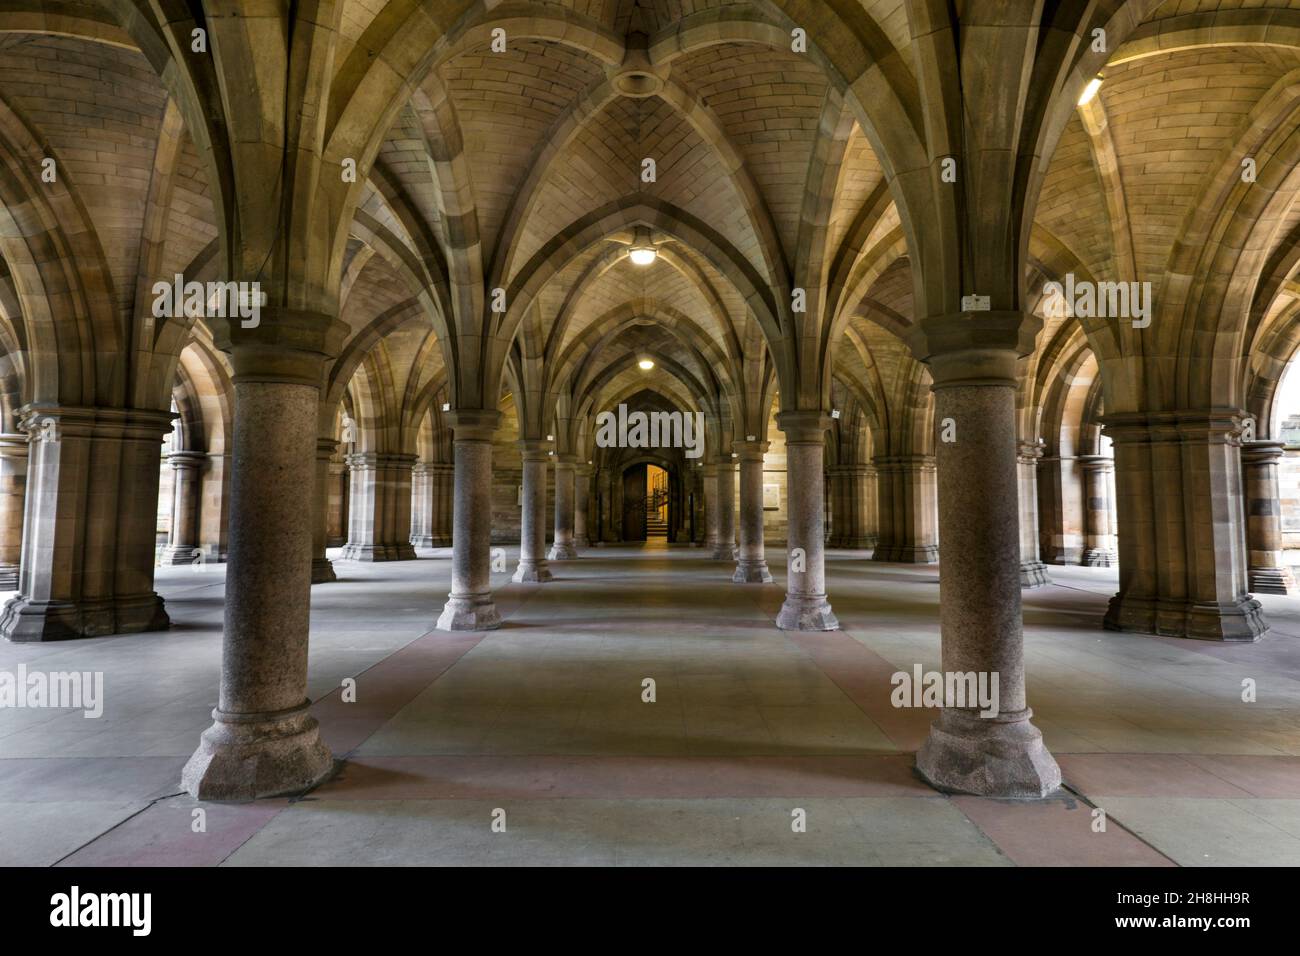 United-Kingdom, Scotland, Glasgow, University of Glasgow, built in the XV century under Jacques II of Scotland, fourth oldest university of the Anglo-saxon world, site where a scene from Harry Potter saga was filmed, cloister of the university Stock Photo